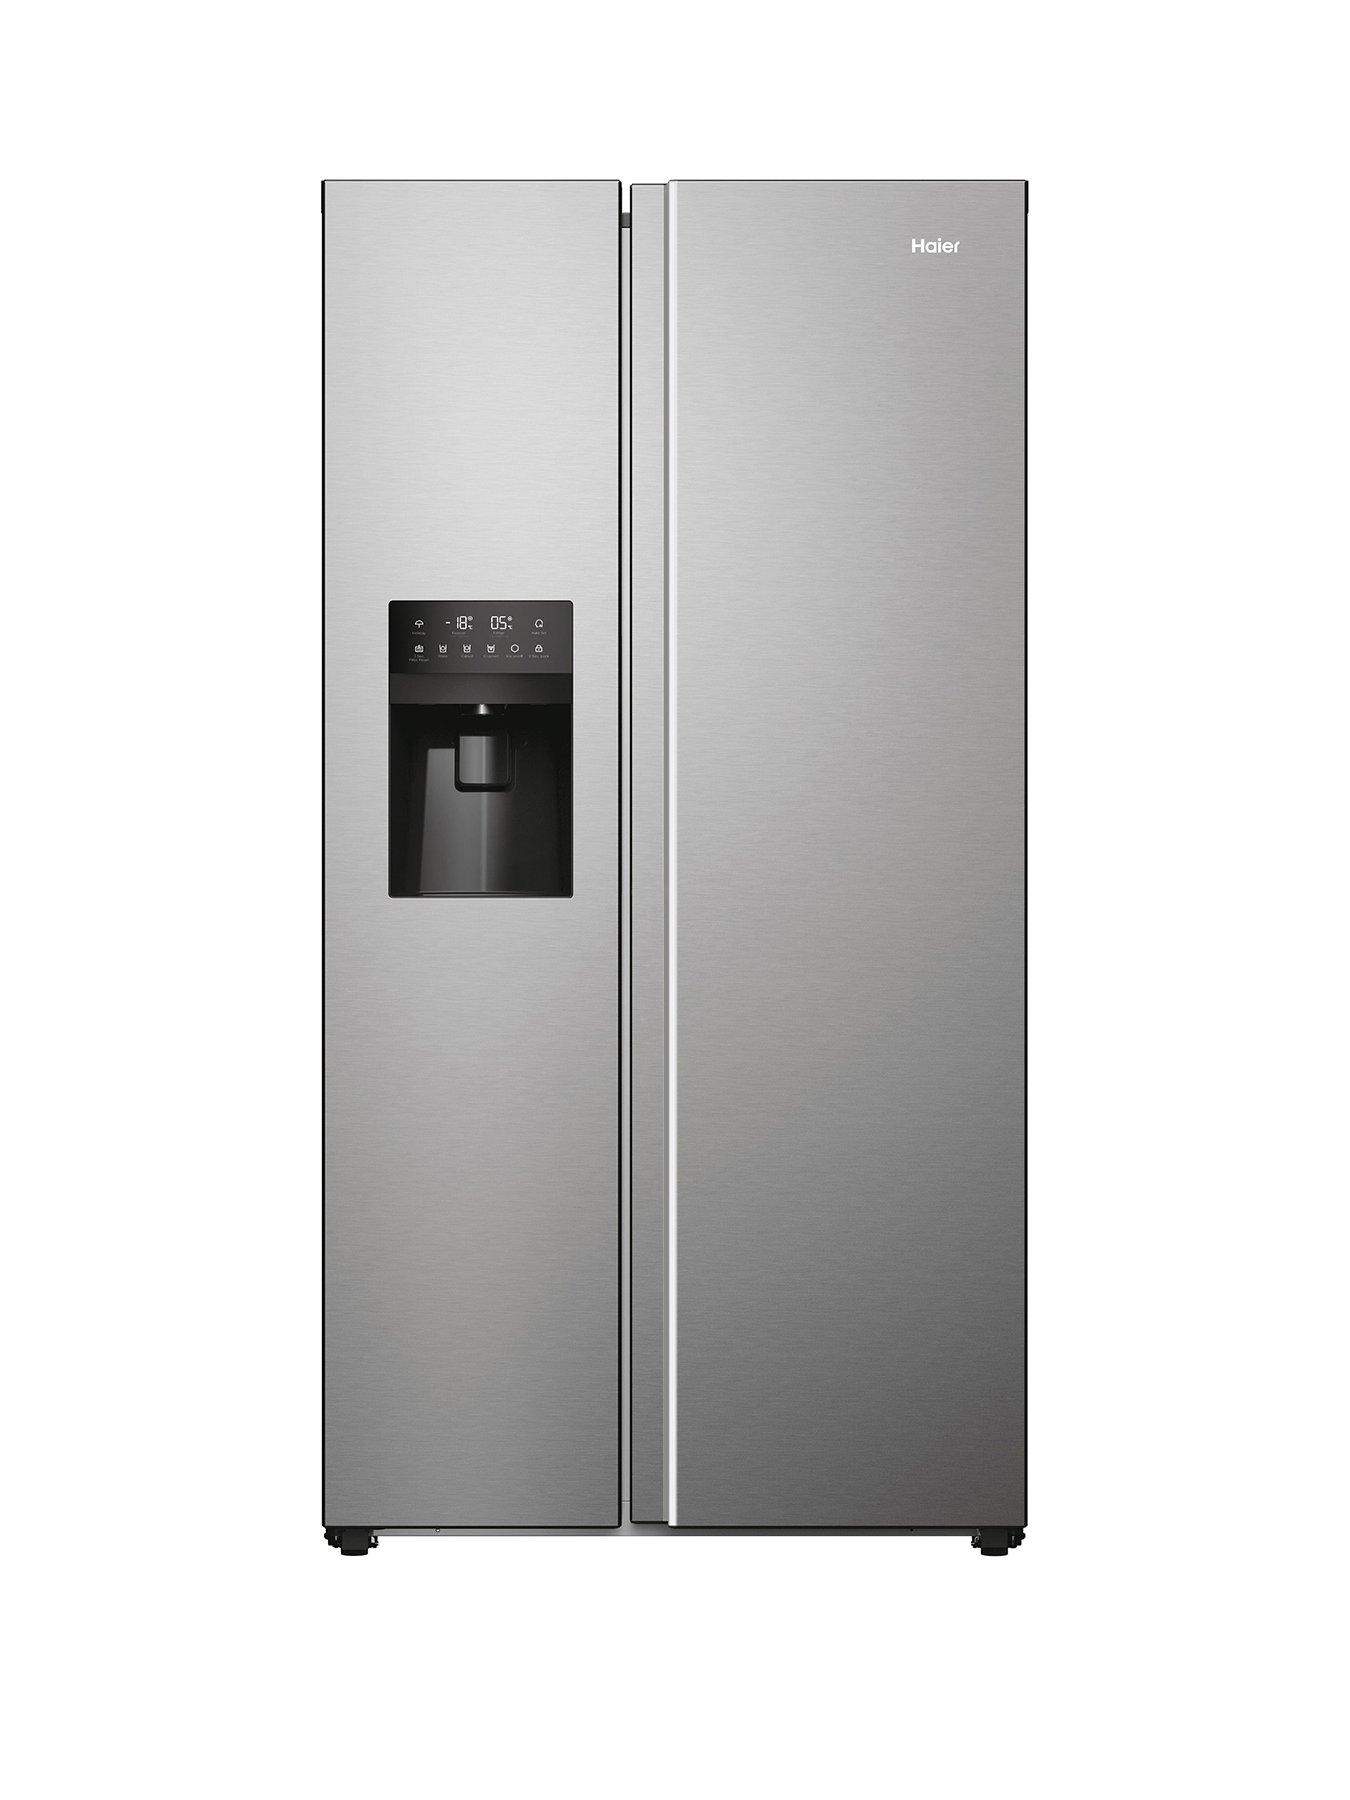 Haier Sbs 90 Hsr5918Dimp Total No Frost American Fridge Freezer With Water  Ice Dispenser, D Rated - Stainless Steel